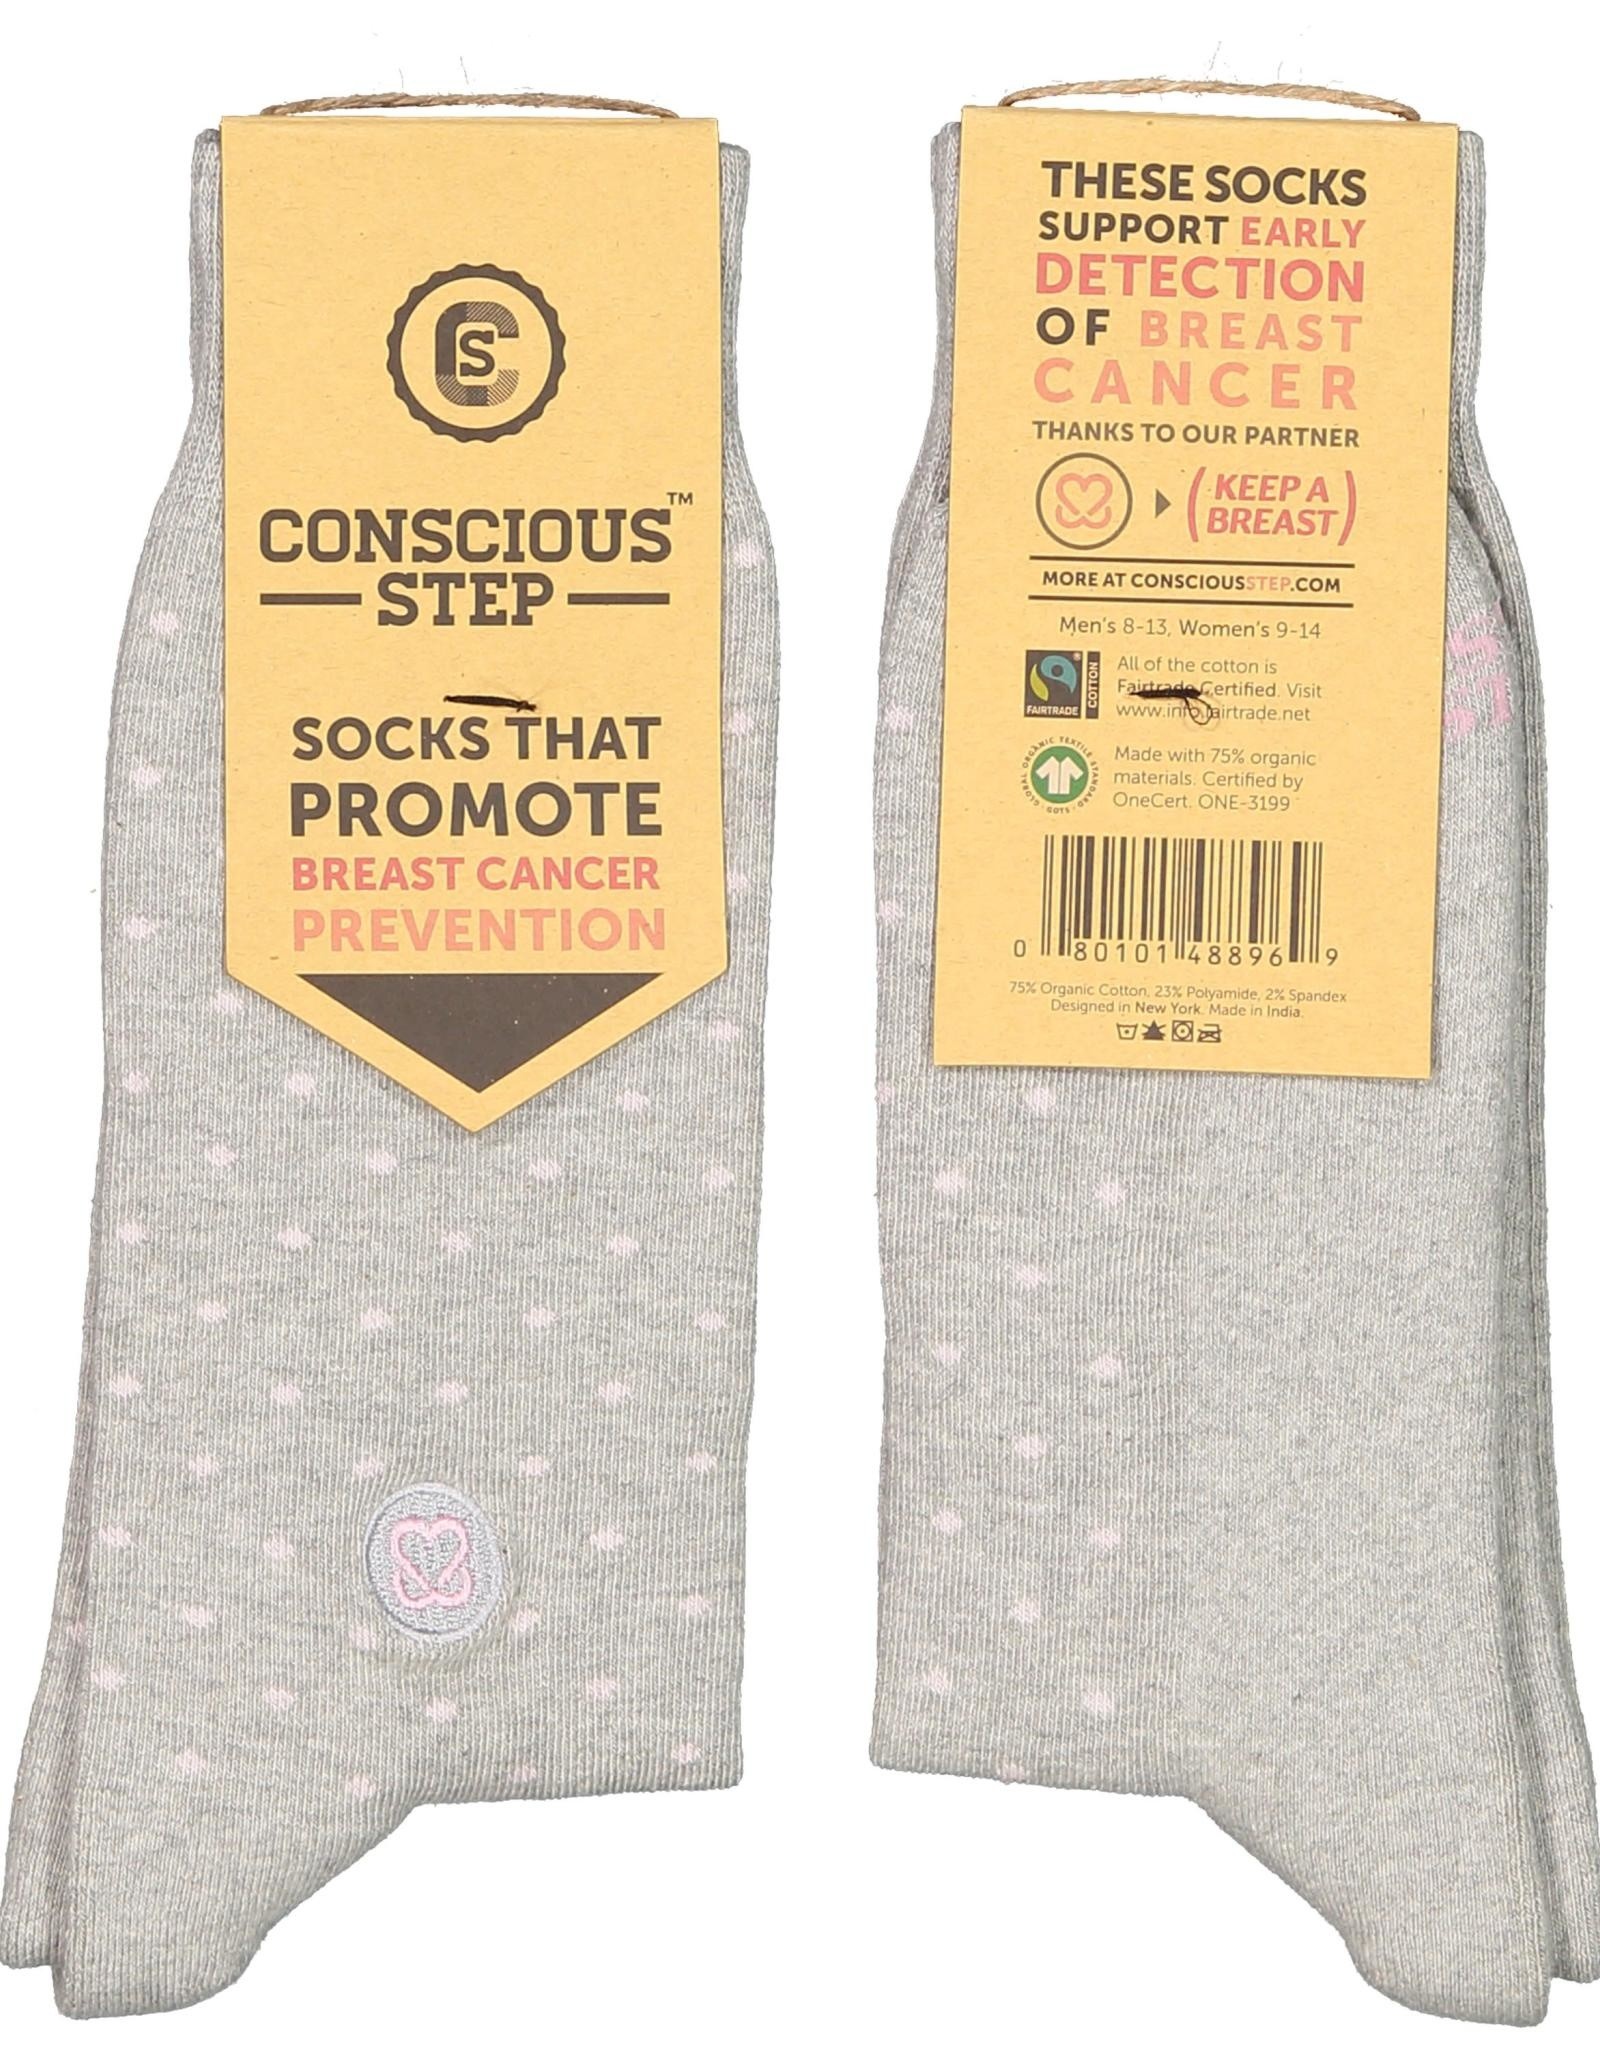 Conscious Step Socks that Prevent Breast Cancer (Polka Dots)